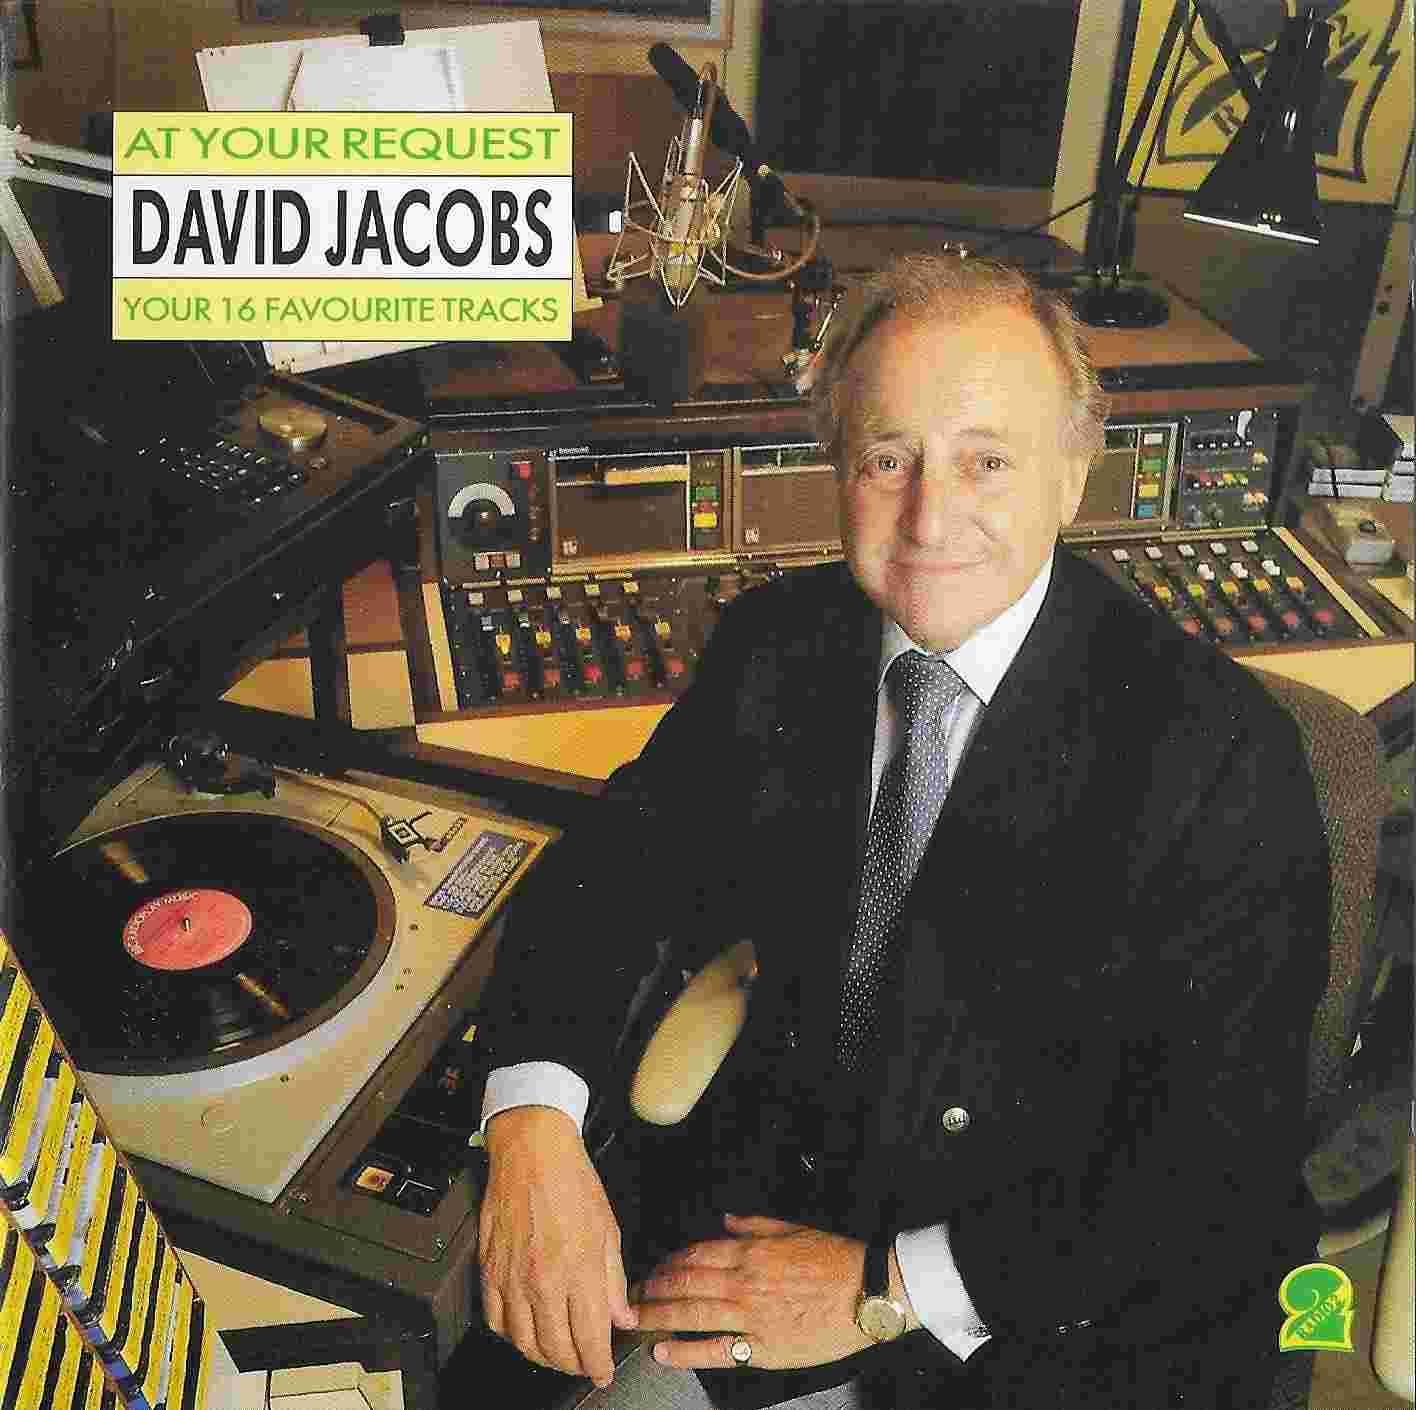 Picture of BBCCD711 At your request - David Jacobs by artist David Jacobs from the BBC cds - Records and Tapes library